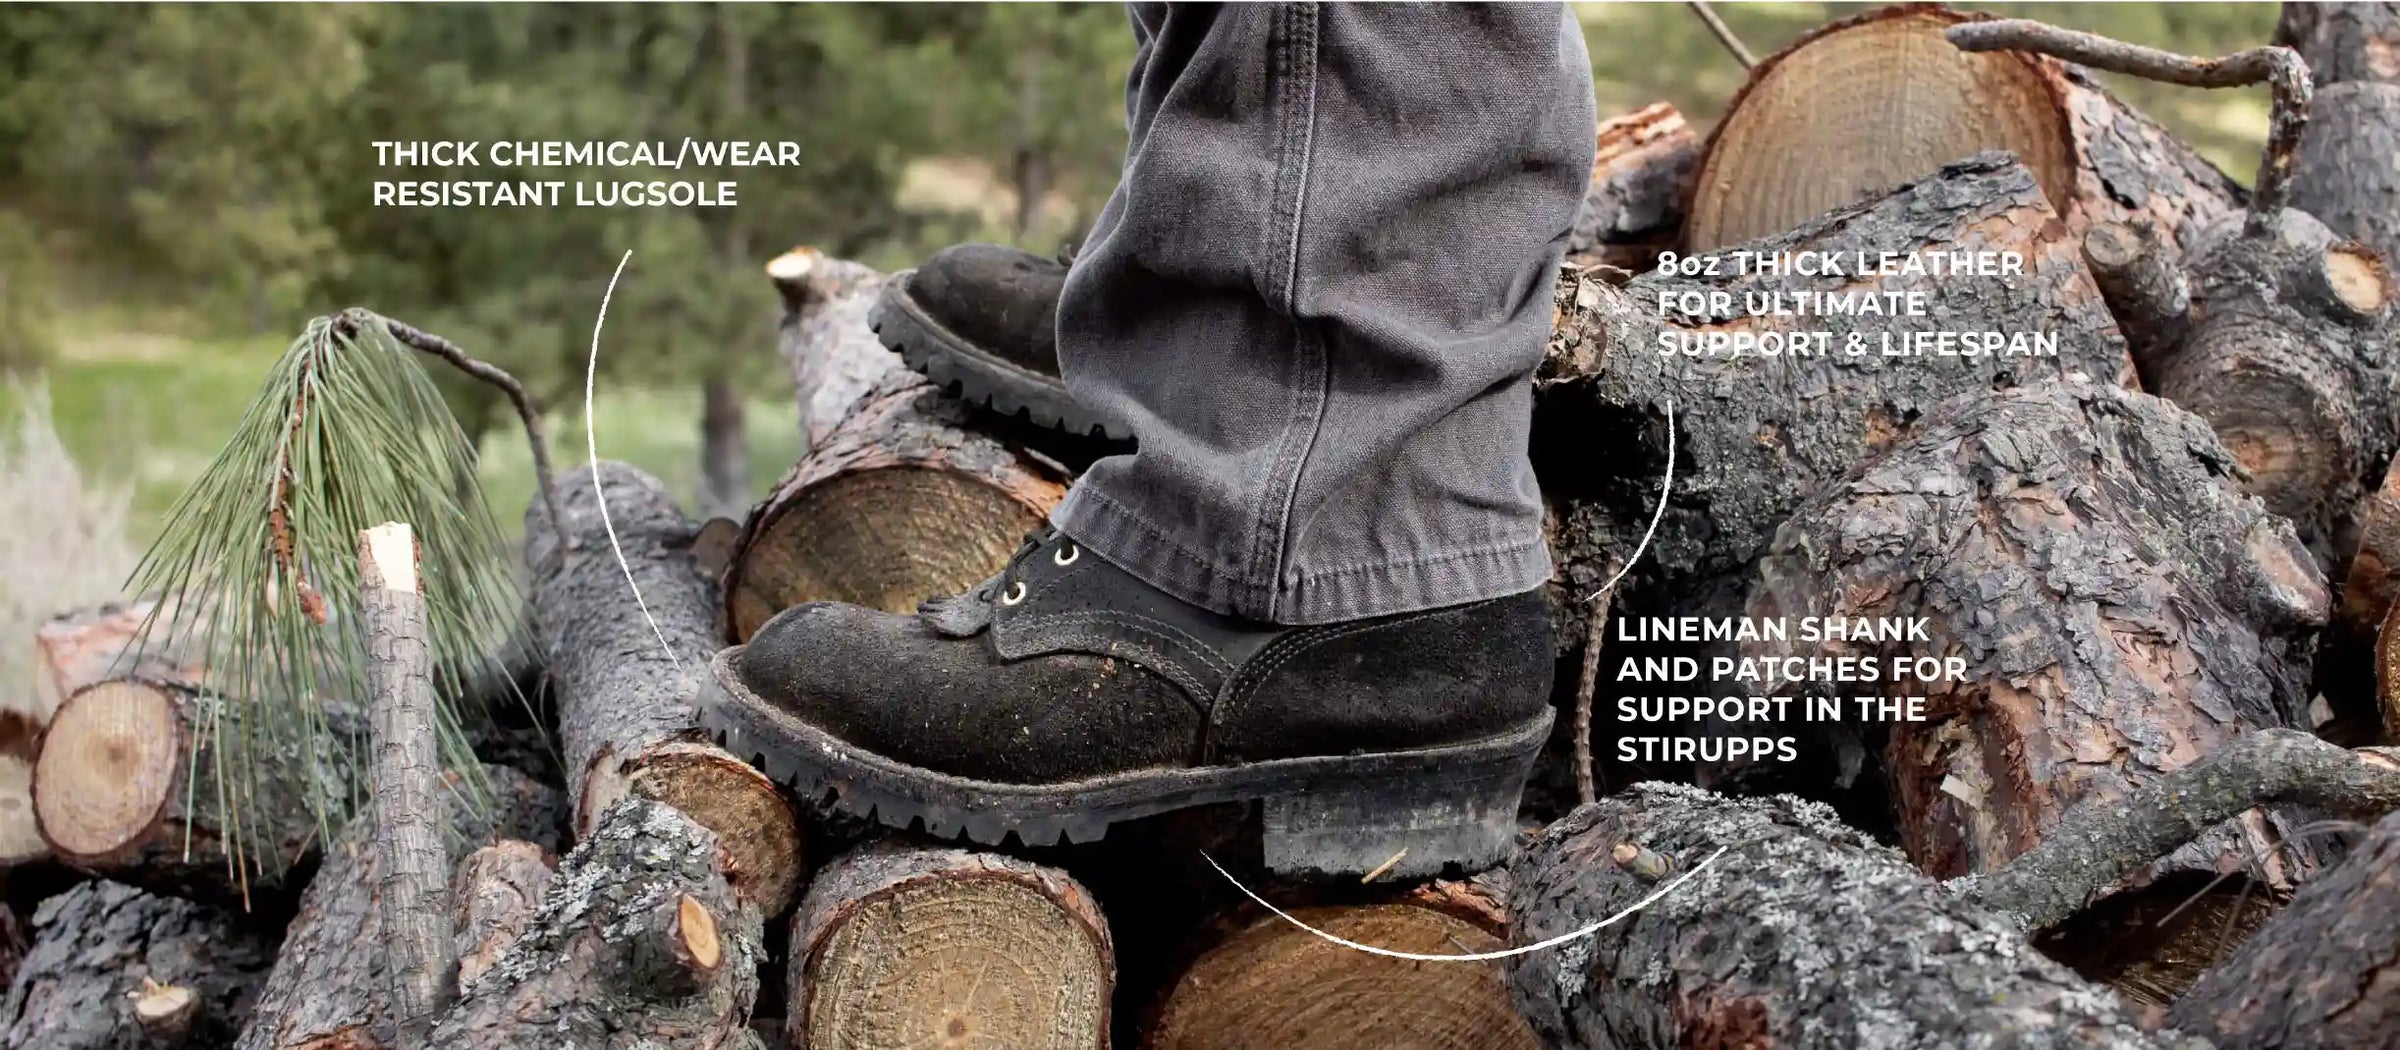 climber boot model from jk boots standing on tree limbs